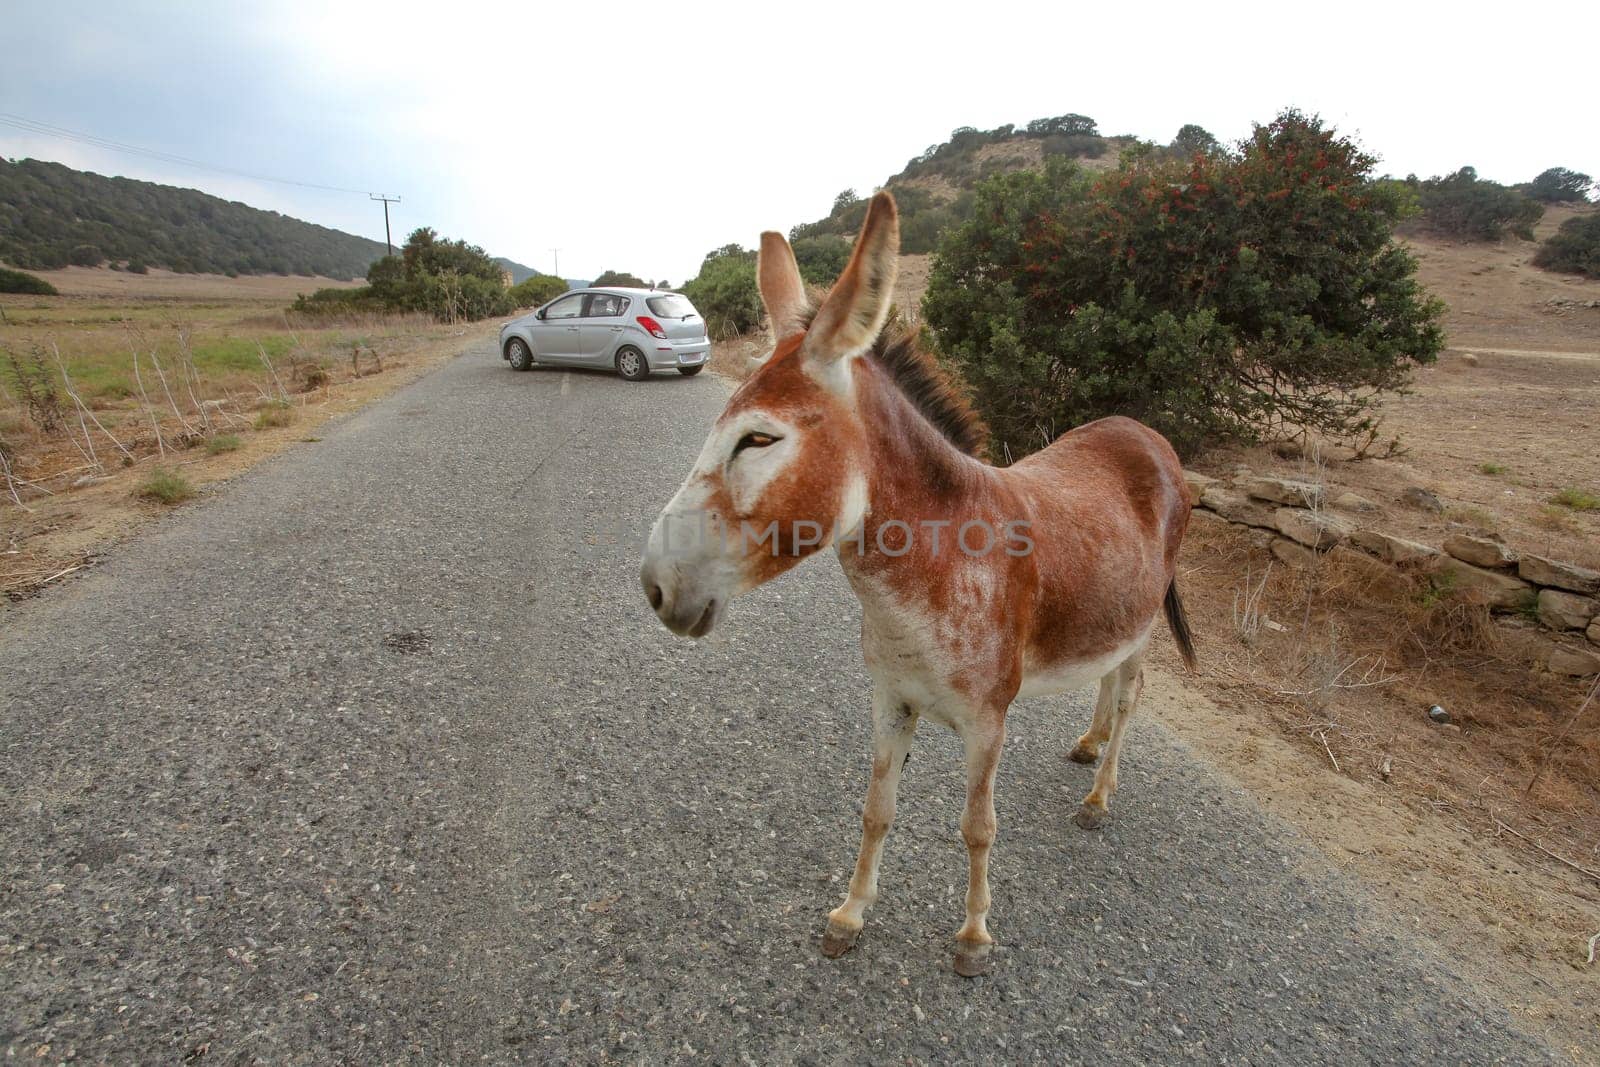 Wild donkey standing on main road, car in distance. These animals roam freely in Karpass region of Northern Cyprus